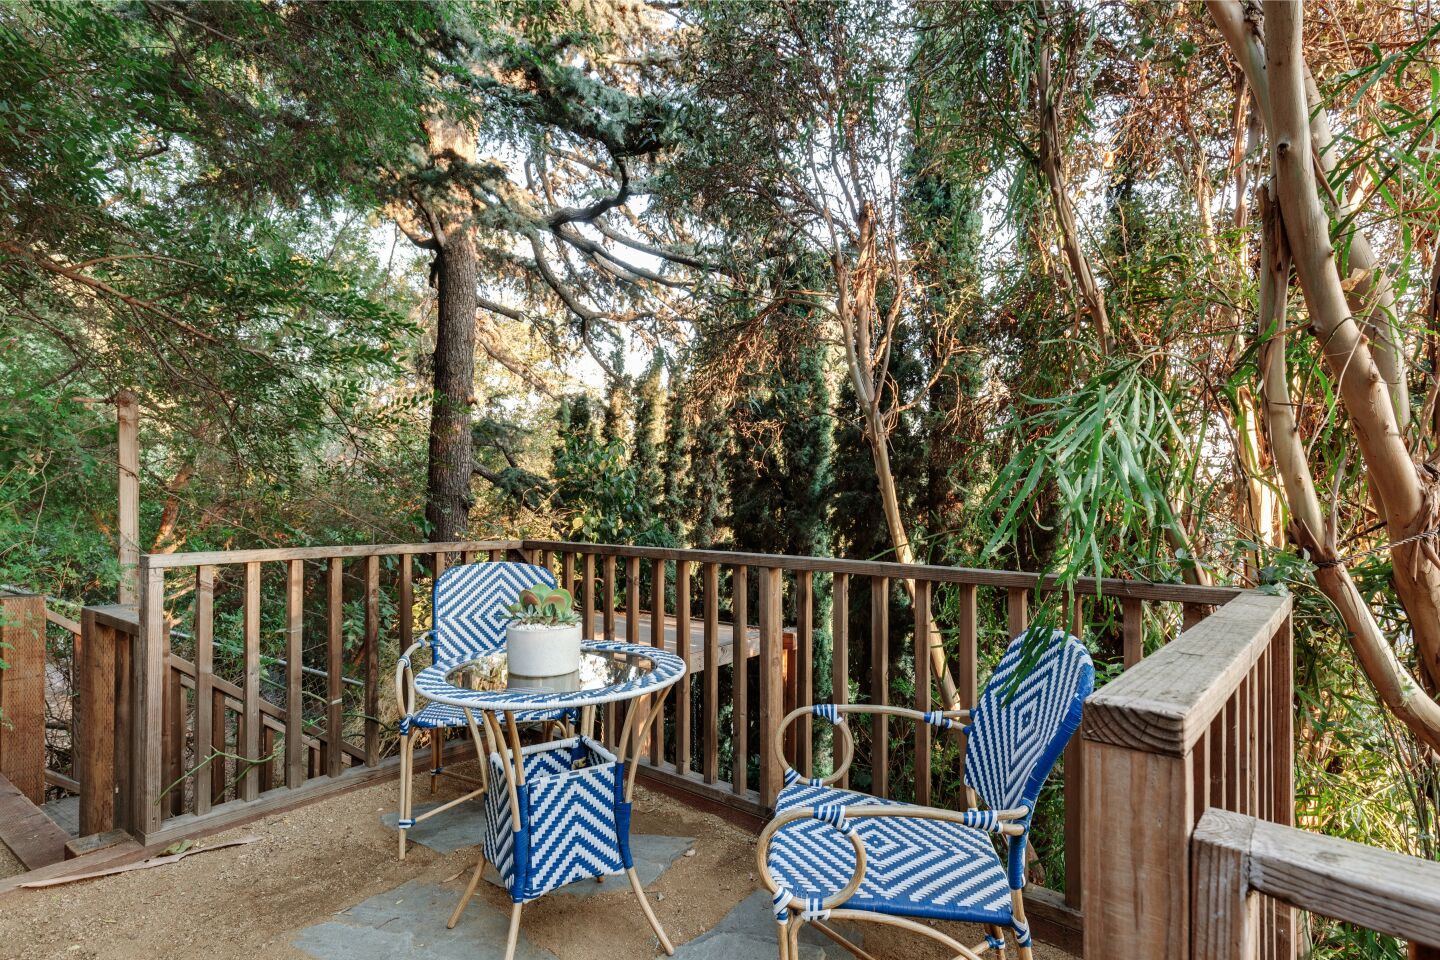 The dining patio with chairs and a cafe table, a wooden railing and trees behind it.